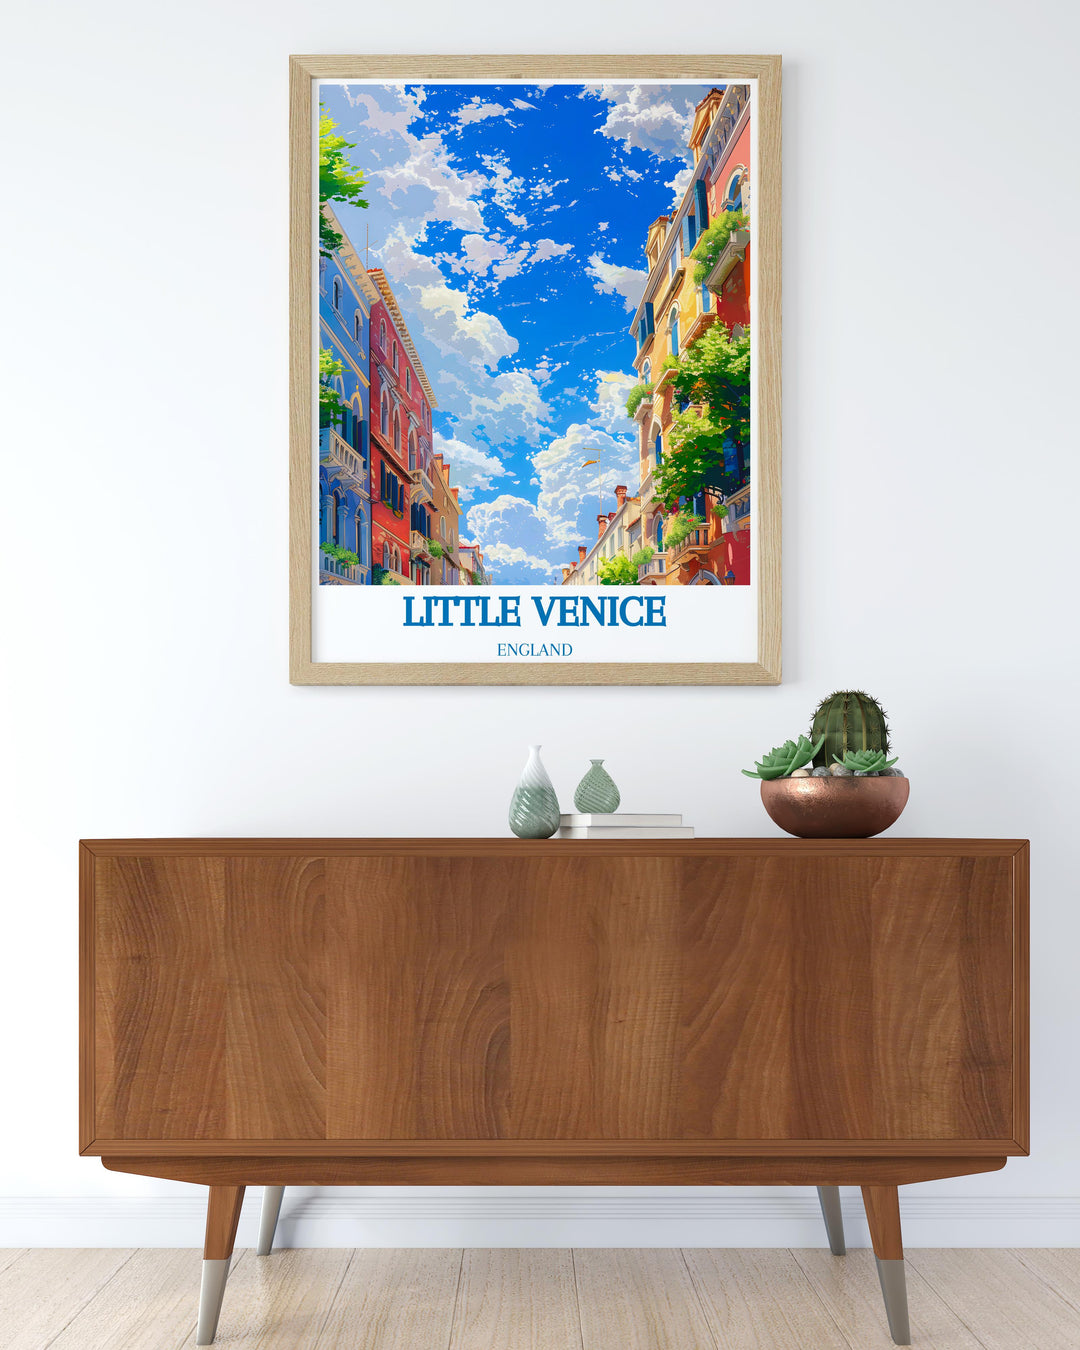 Travel poster of Little Venice, capturing the picturesque canals and narrowboats, great for anyone who loves Londons cityscapes.